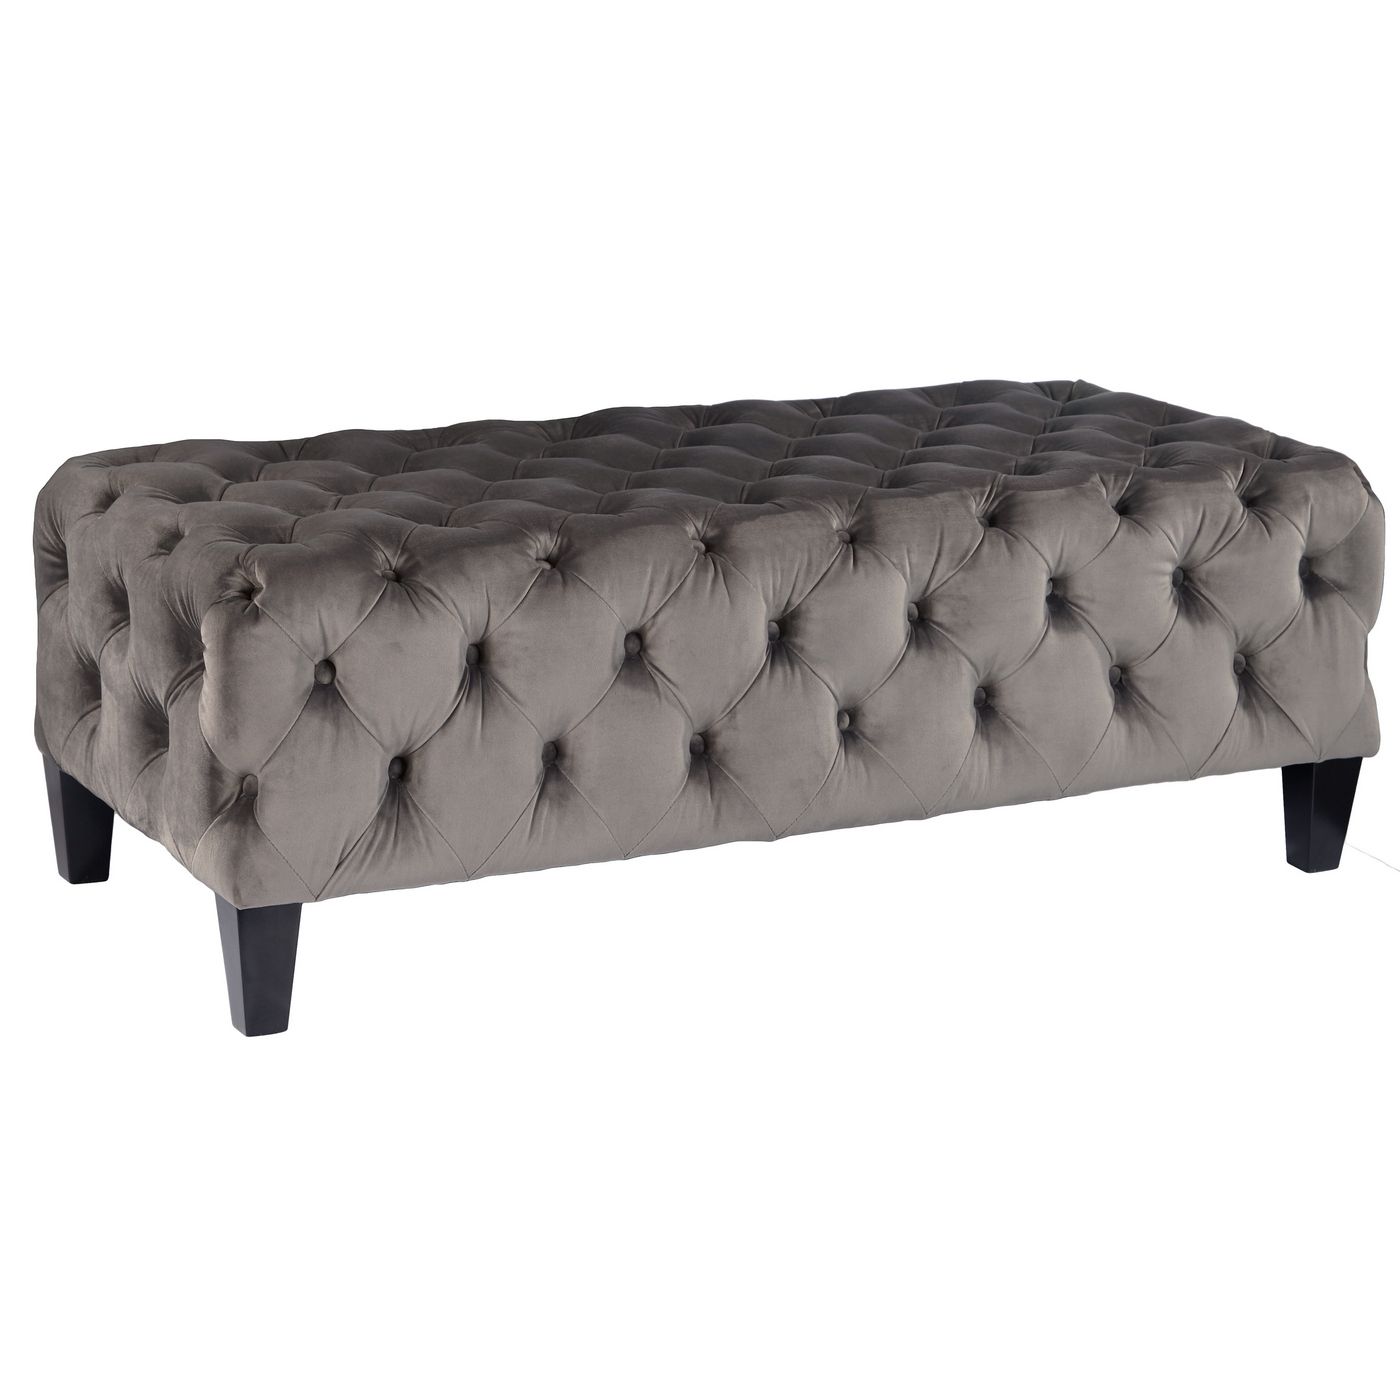 Chatham Rectangular Deep Button Tufted Ottoman W/ Grey Faux Velvet For Tufted Ottomans (View 15 of 20)